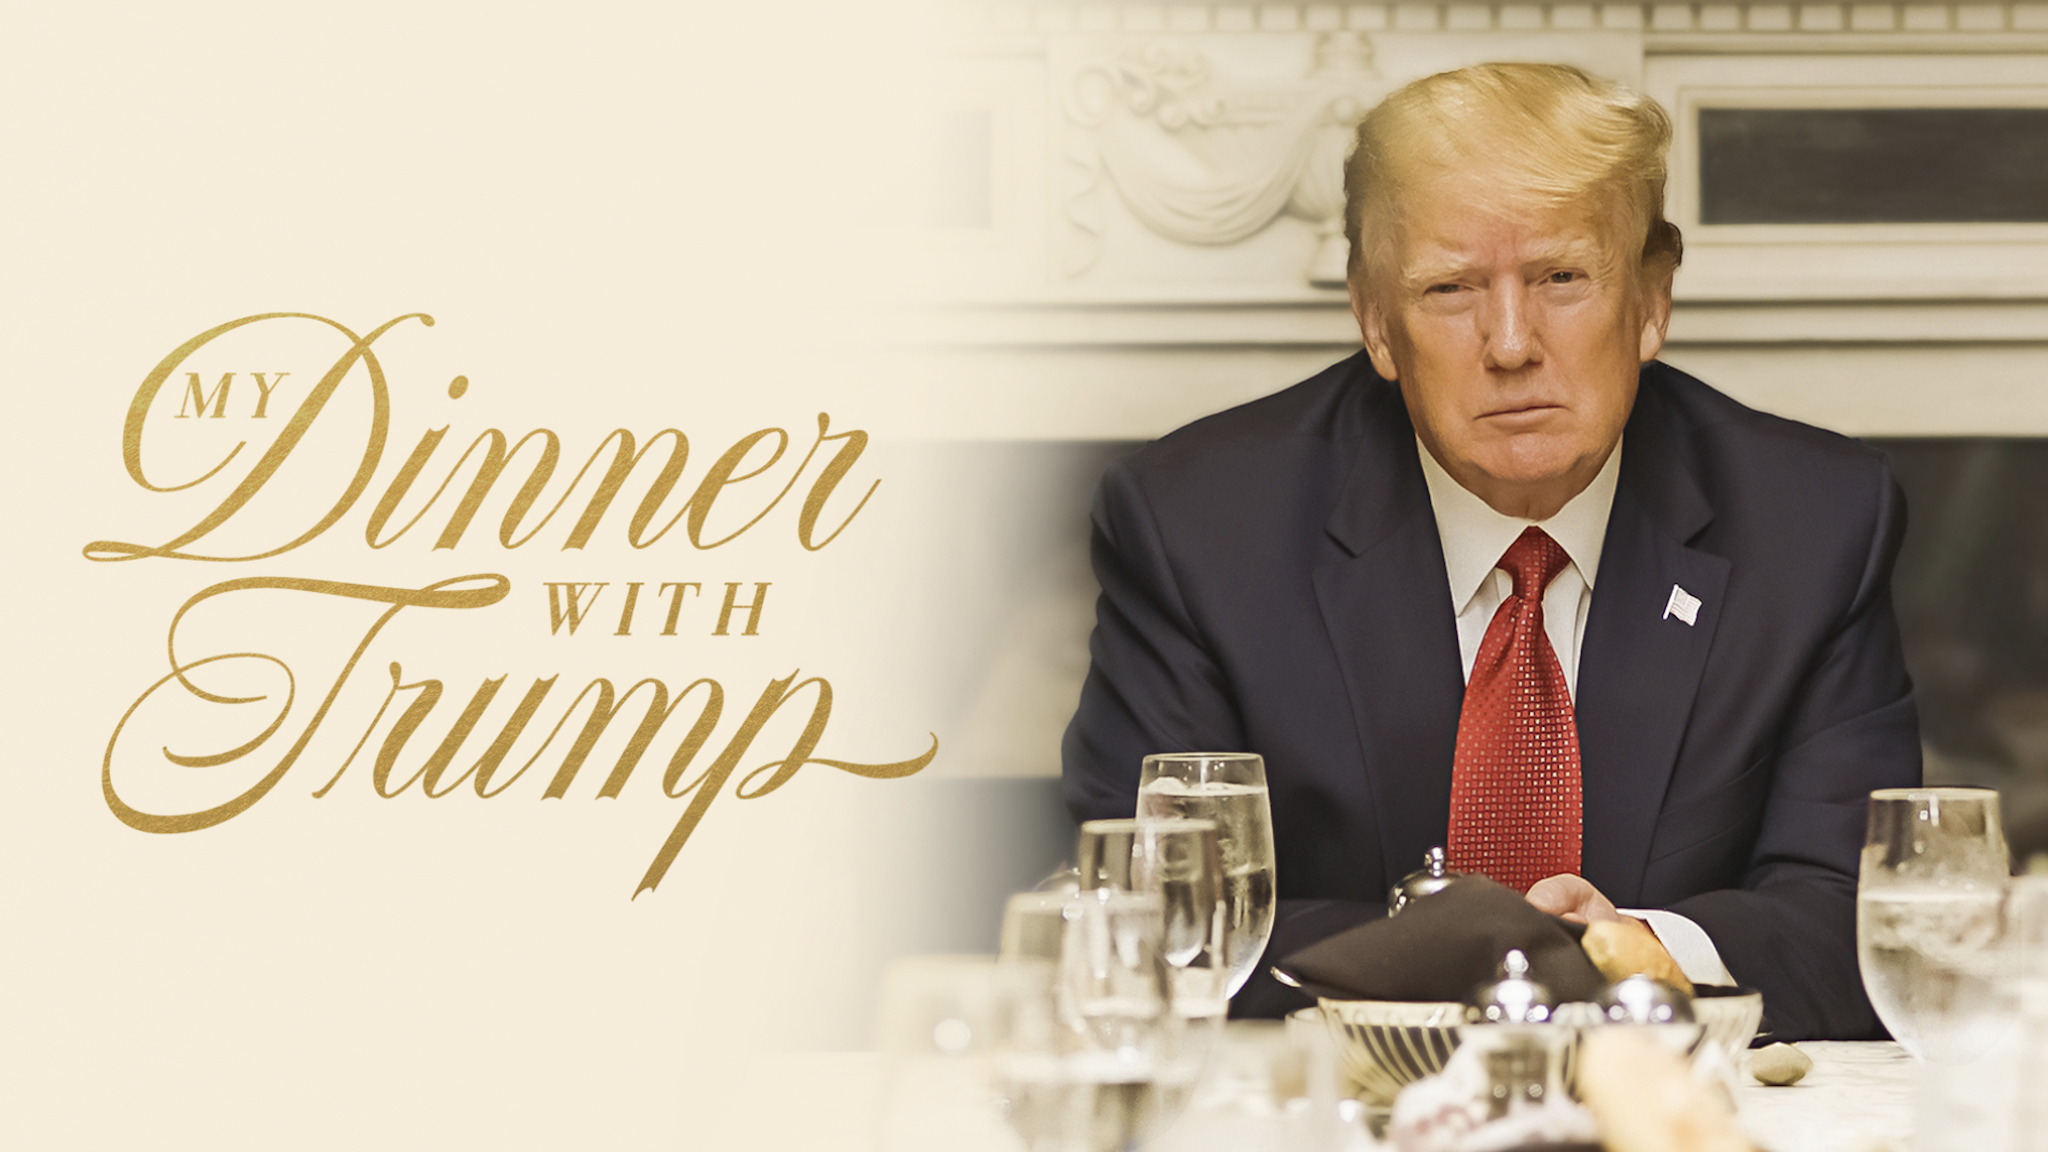 “My Dinner with Trump,” a 73-minute-long film shot in Trump-style cinéma vérité at his Bedminster, N.J., golf club, features the former and possibly future president talking with key advisers at a crucial time in his post-presidency.